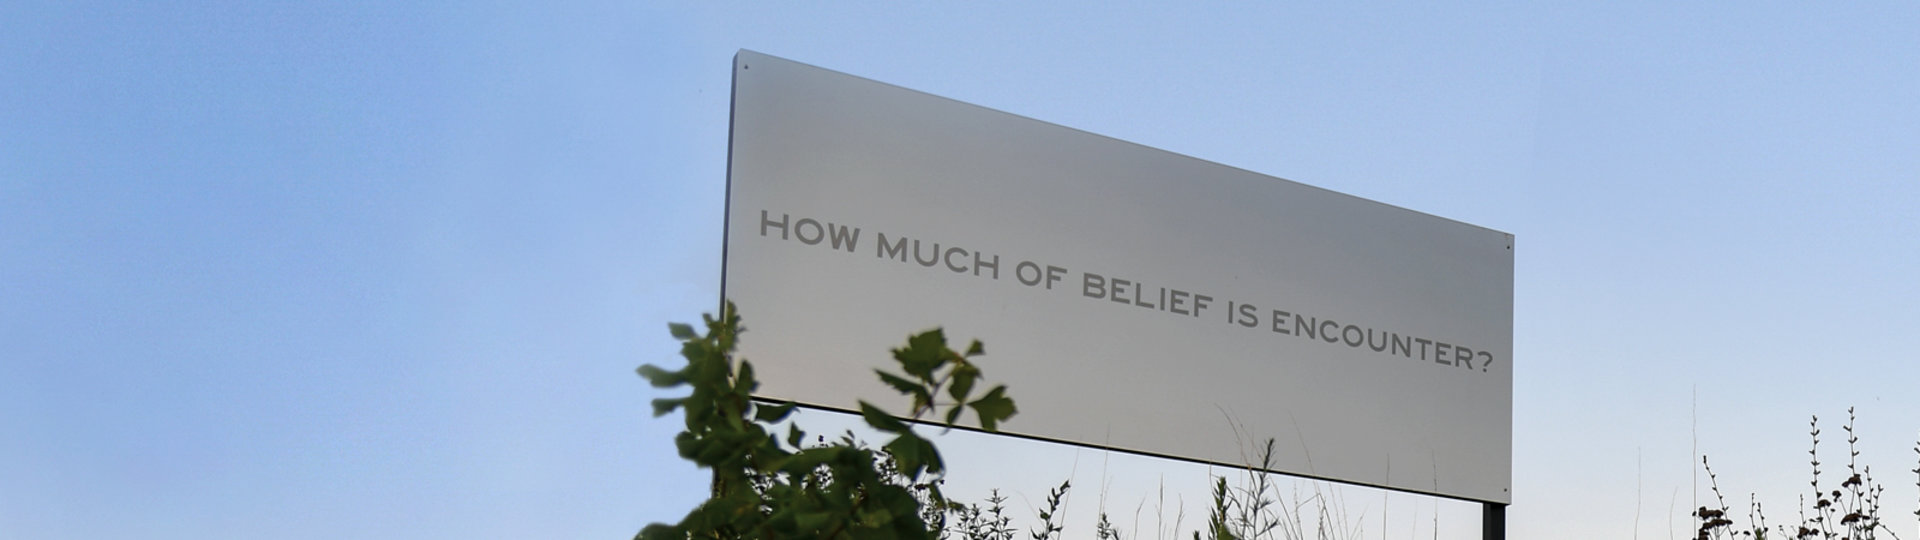 Outdoor art billboard by Chloe Bass that reads, "How much belief is encounter" 